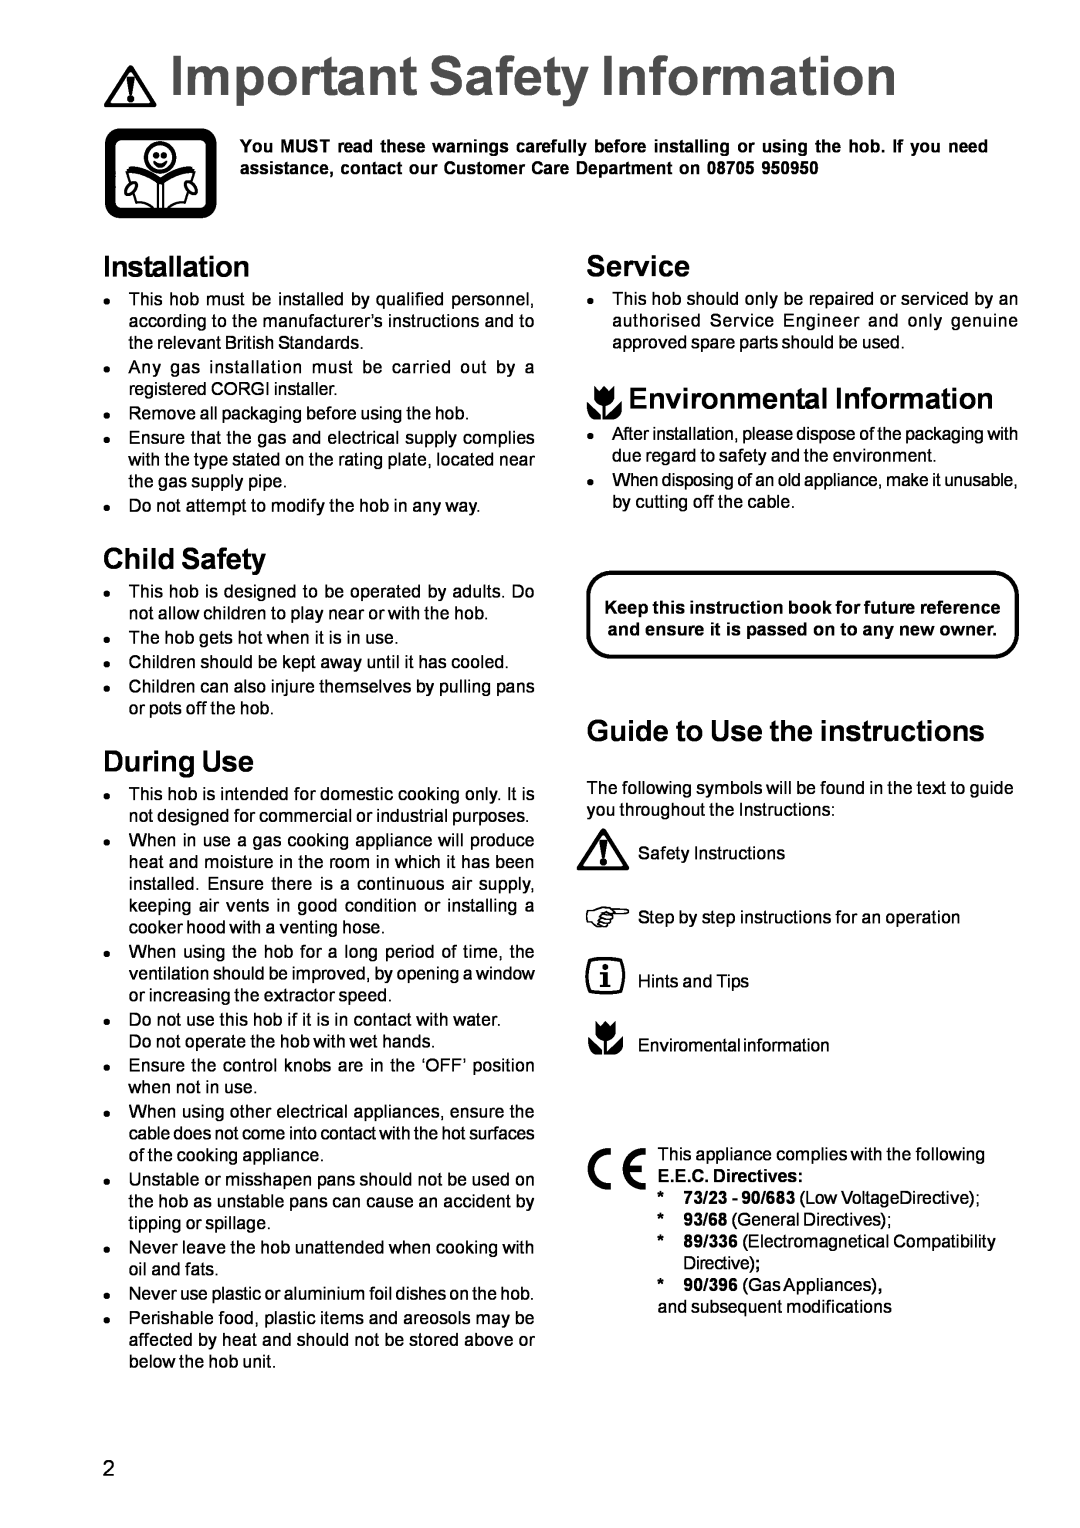 Electrolux EHG 680 manual Important Safety Information, Installation, Service, Environmental Information, Child Safety 